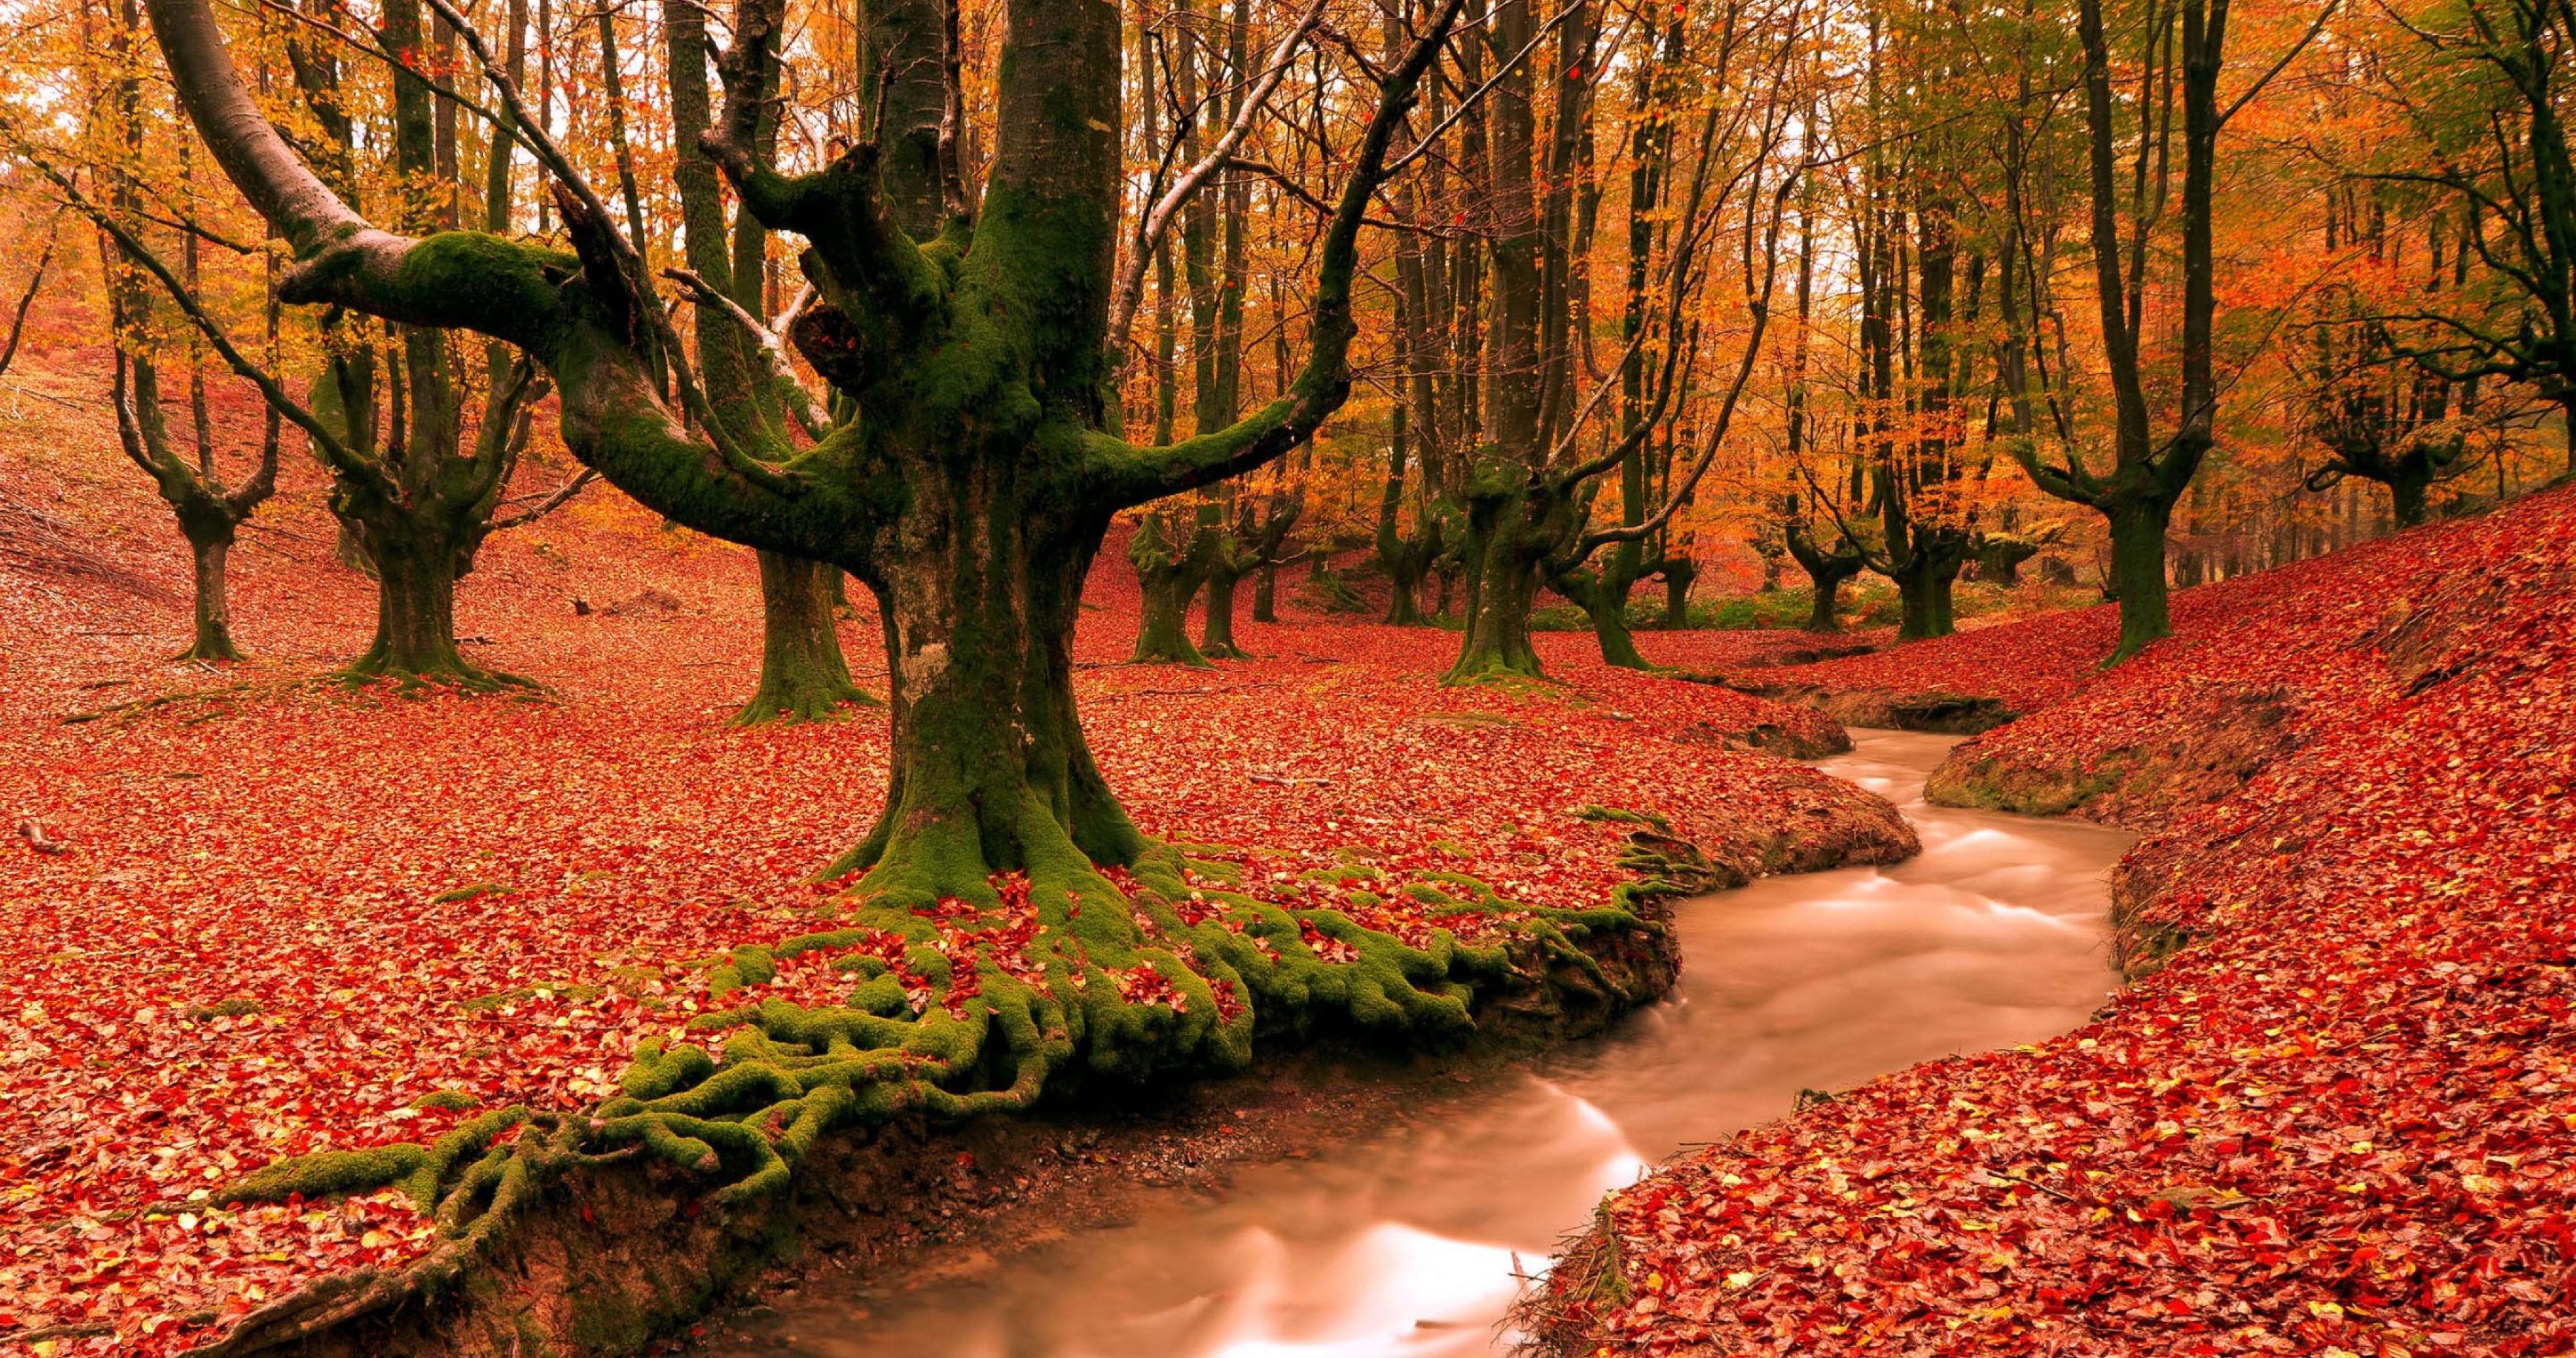 4k Wallpaper Red Forest